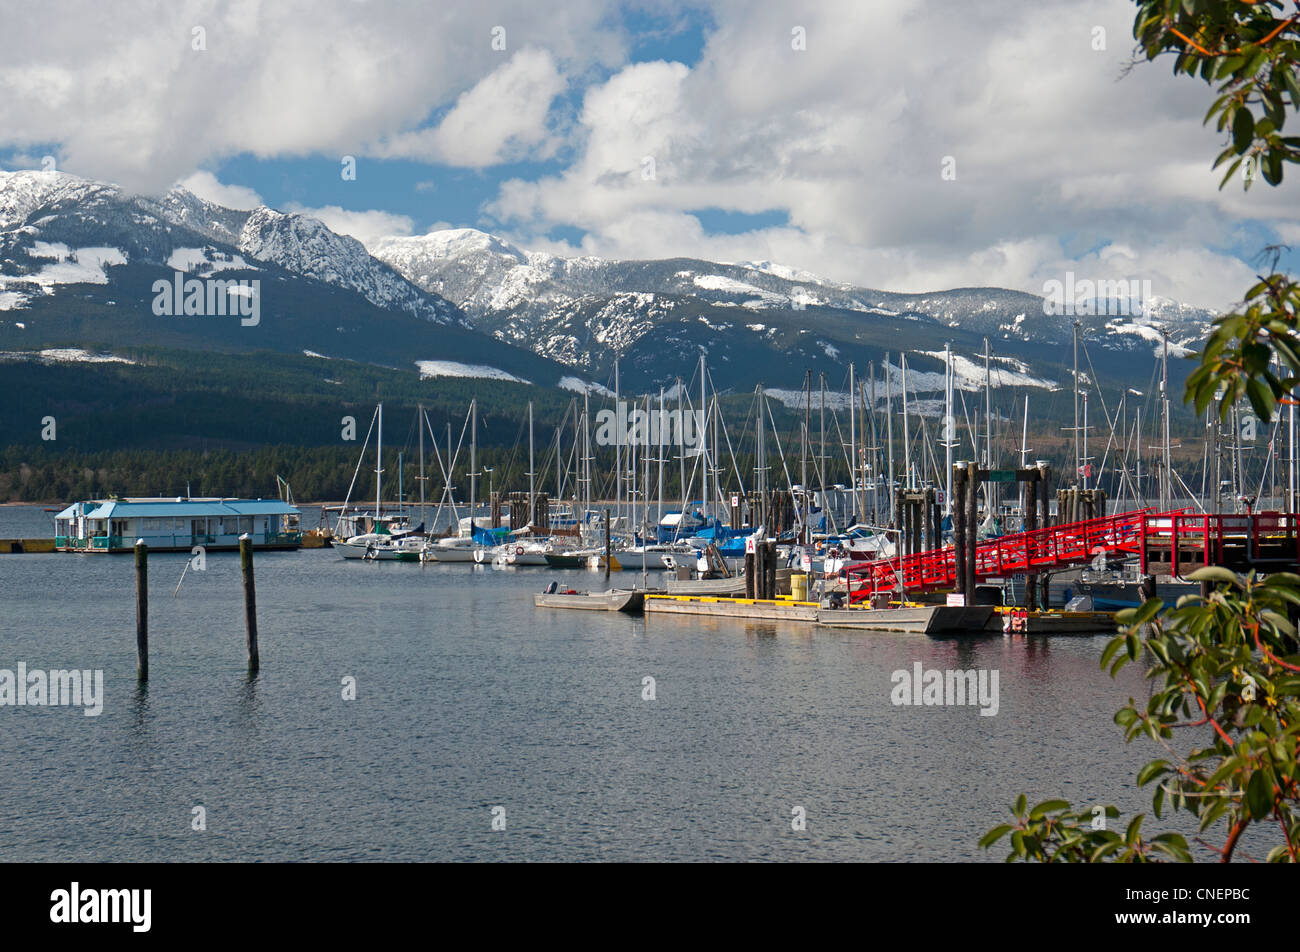 The Fishing and yachting Harbour of Deep Bay, on Vancouver Island, British Columbia Canada.  SCO 8144 Stock Photo